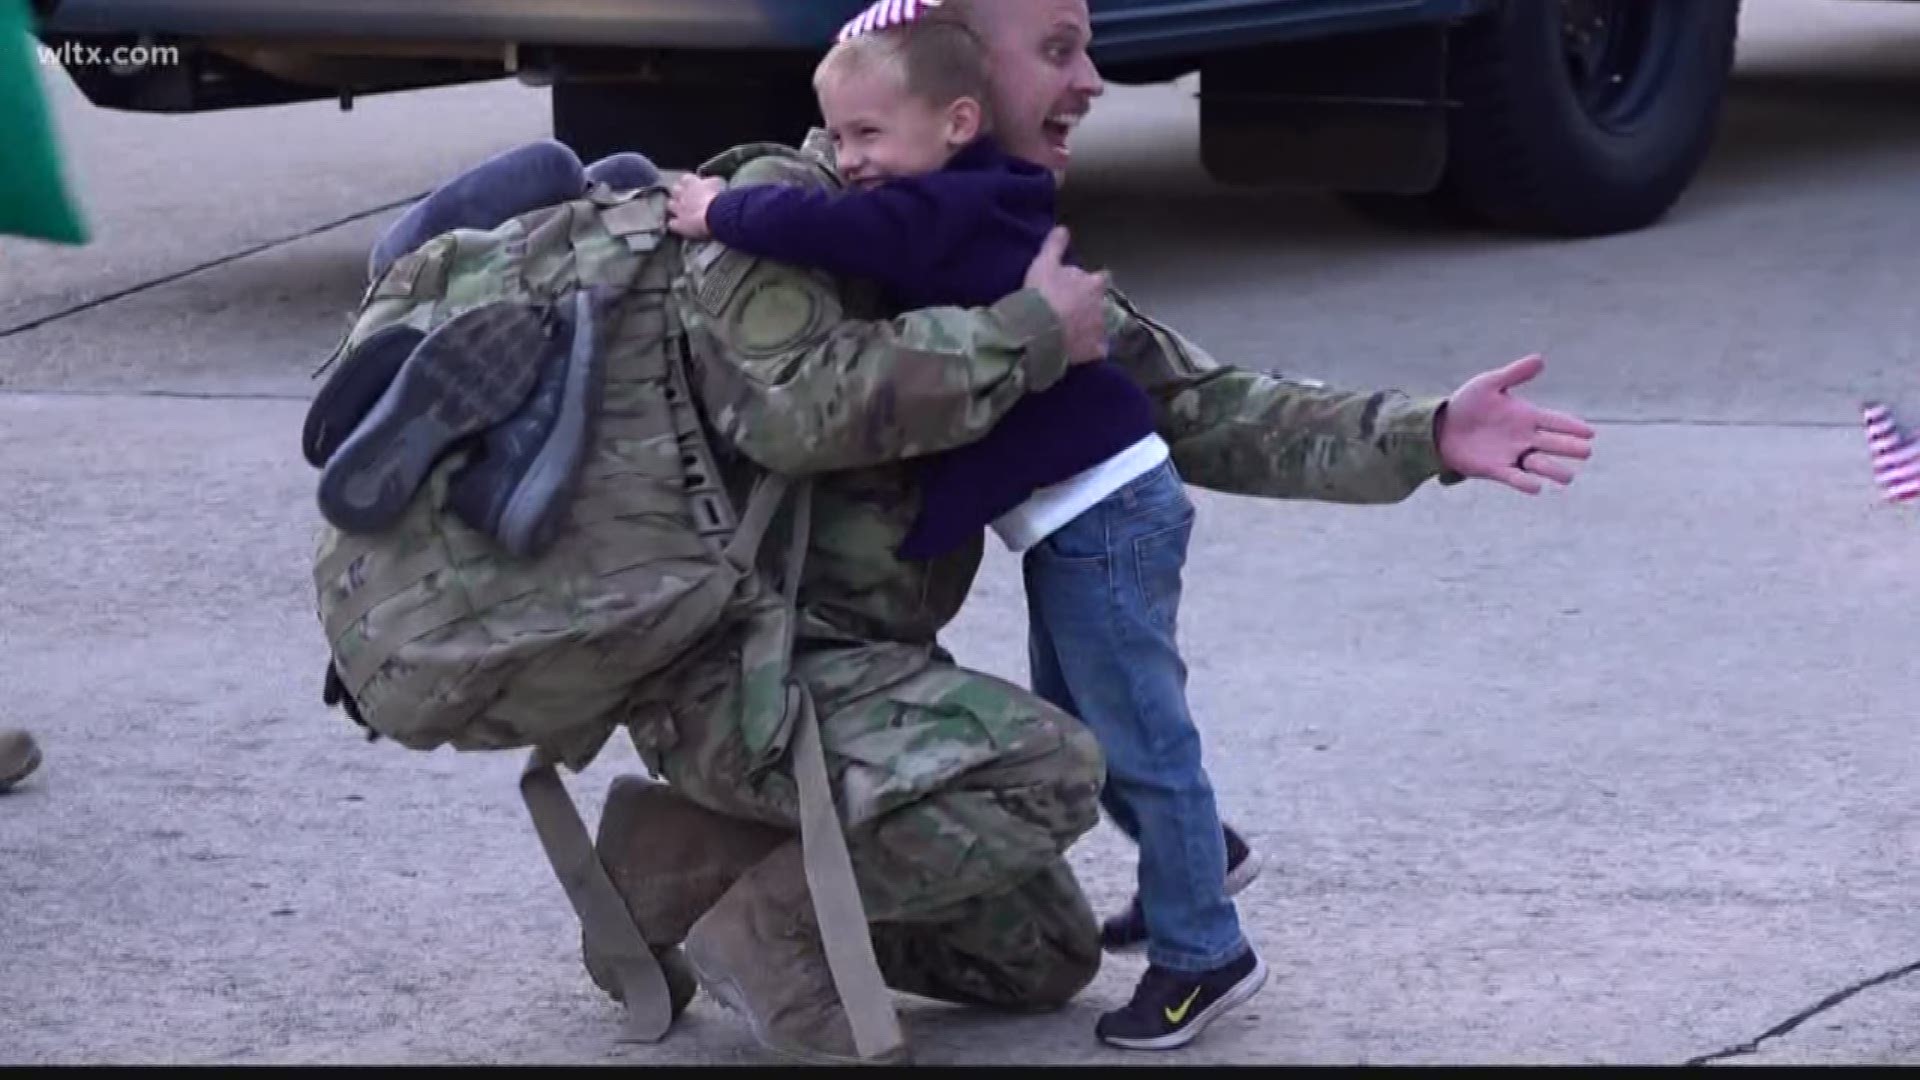 After being overseas for months, airmen were able to reunite with their families here in the Midlands.